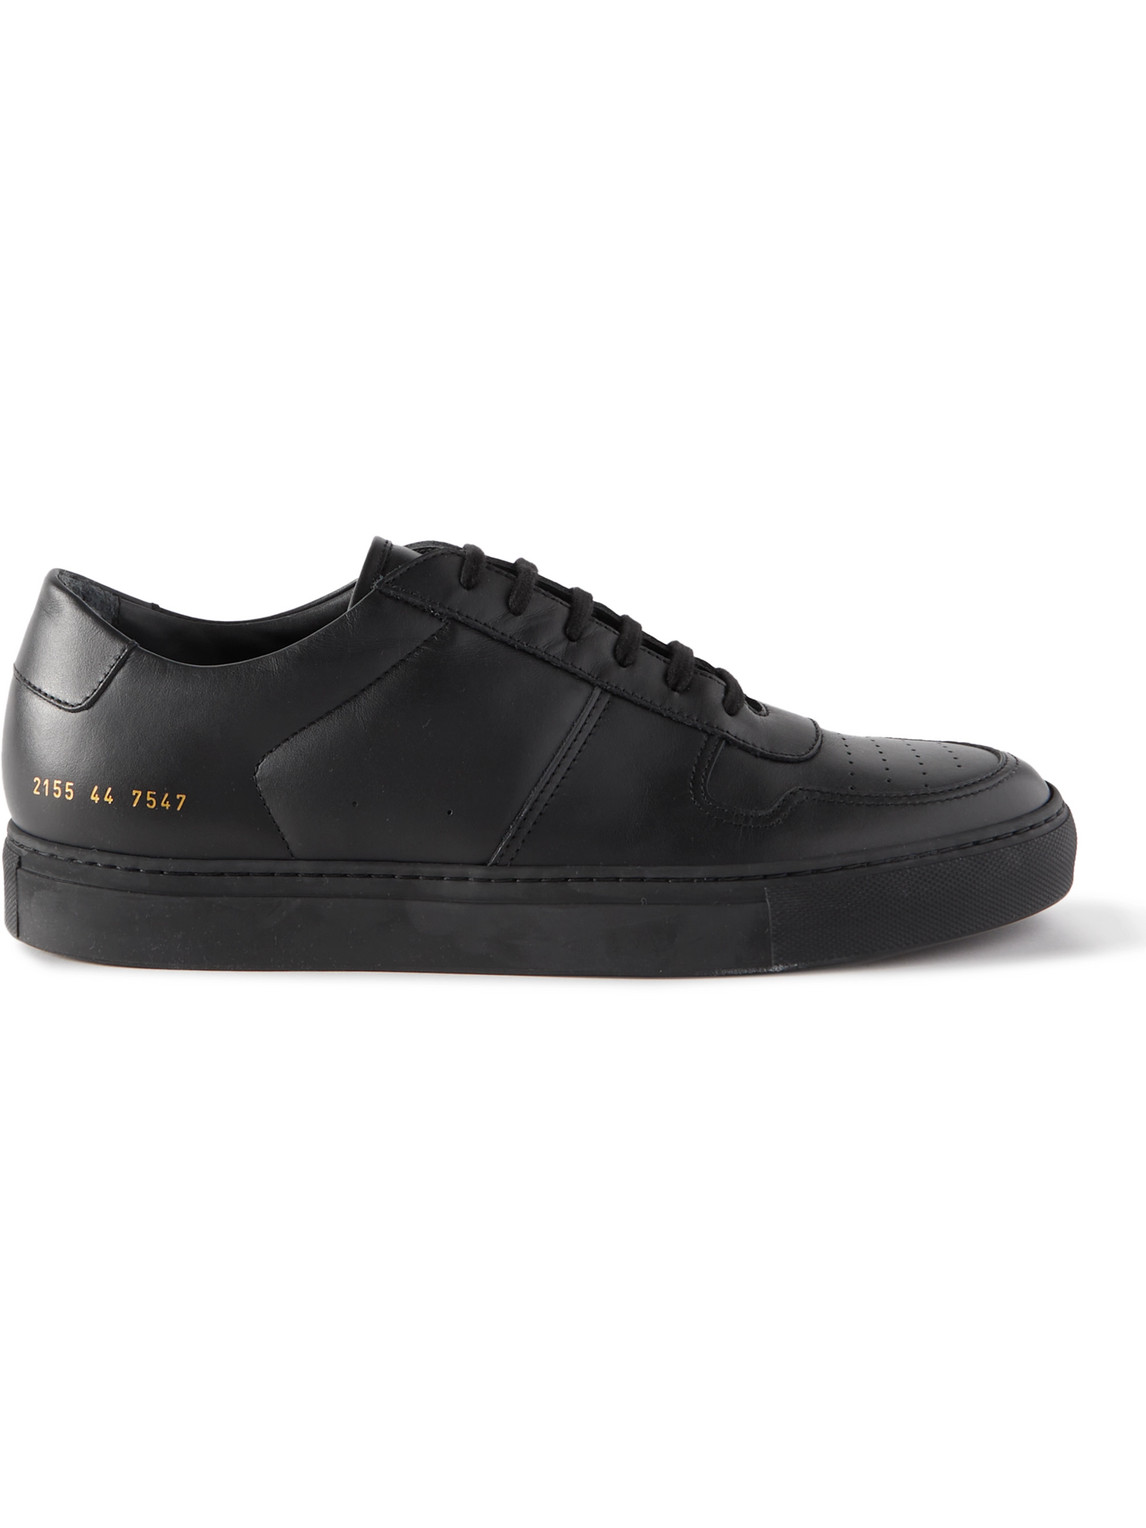 Common Projects - BBall Leather Sneakers - Men - Black - EU 41 von Common Projects